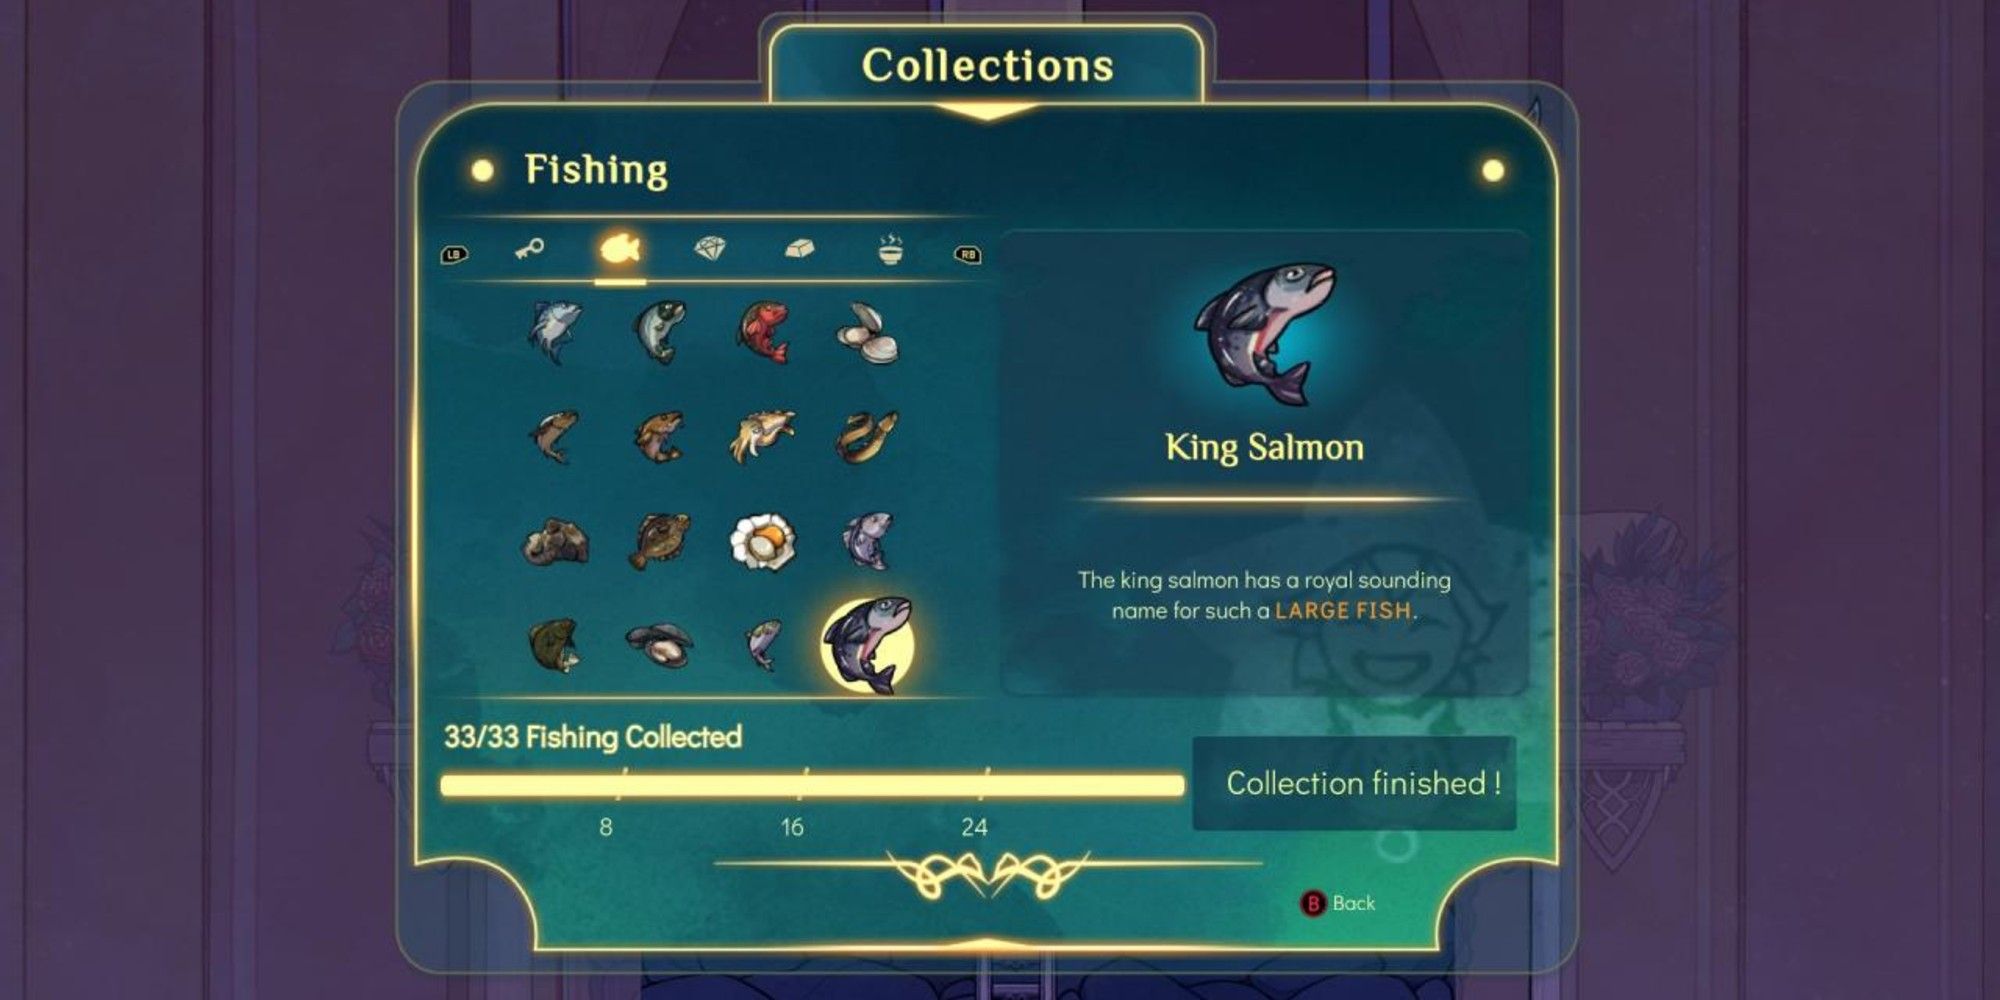 fish collection opened, with all 33 fish collected